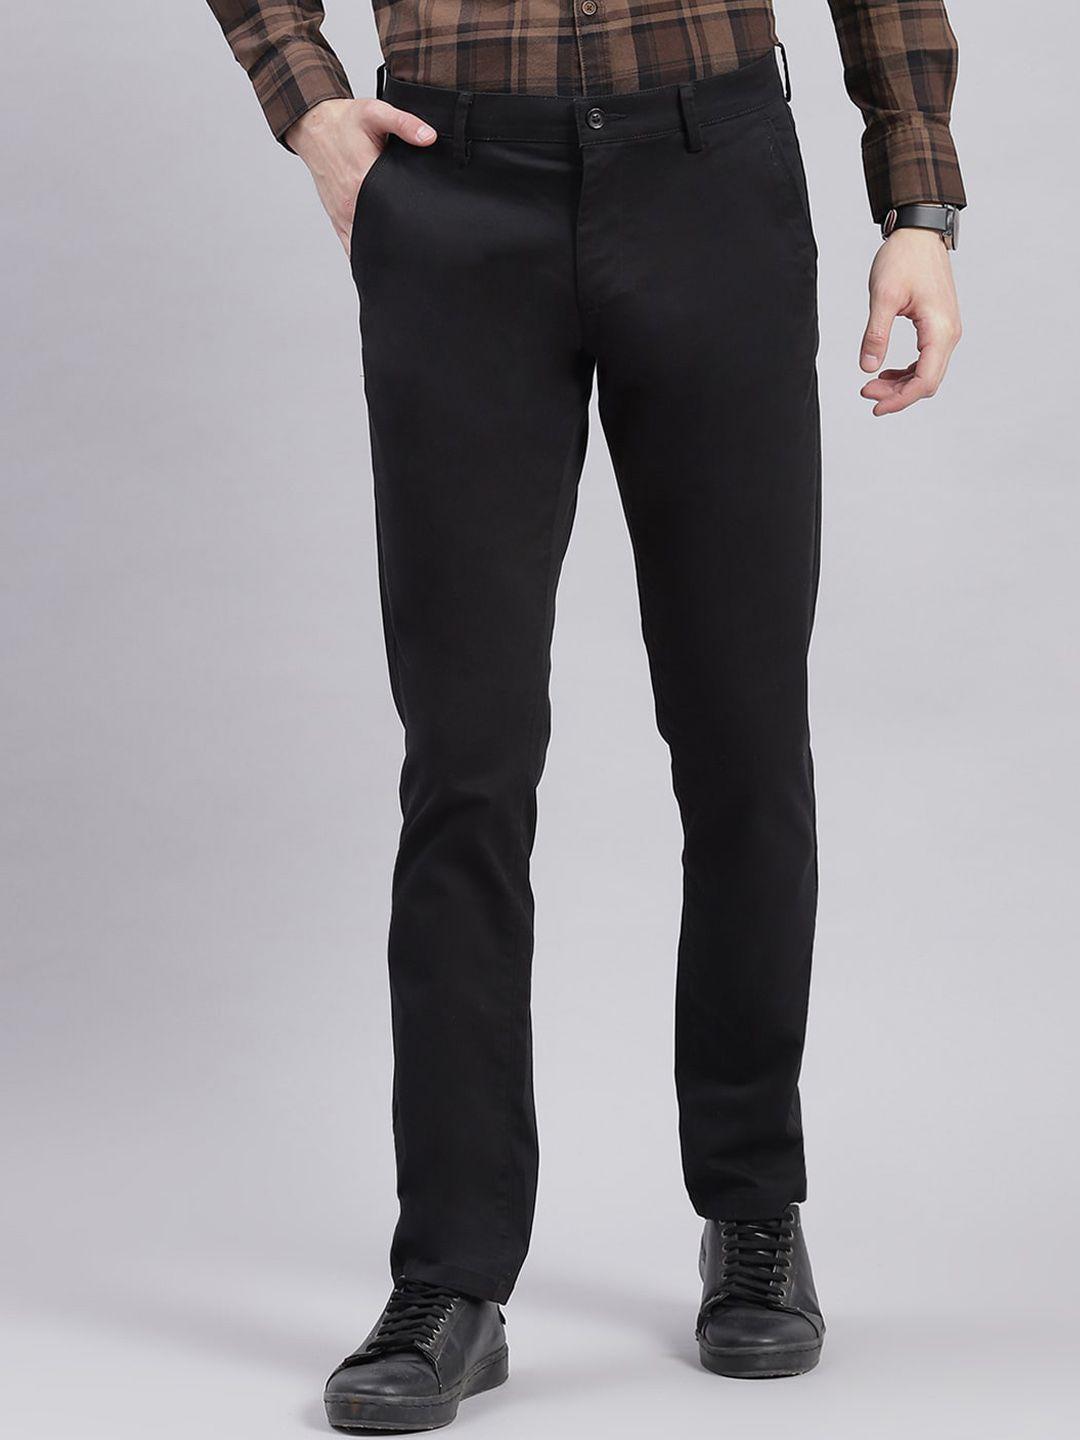 monte carlo men tapered fit trousers